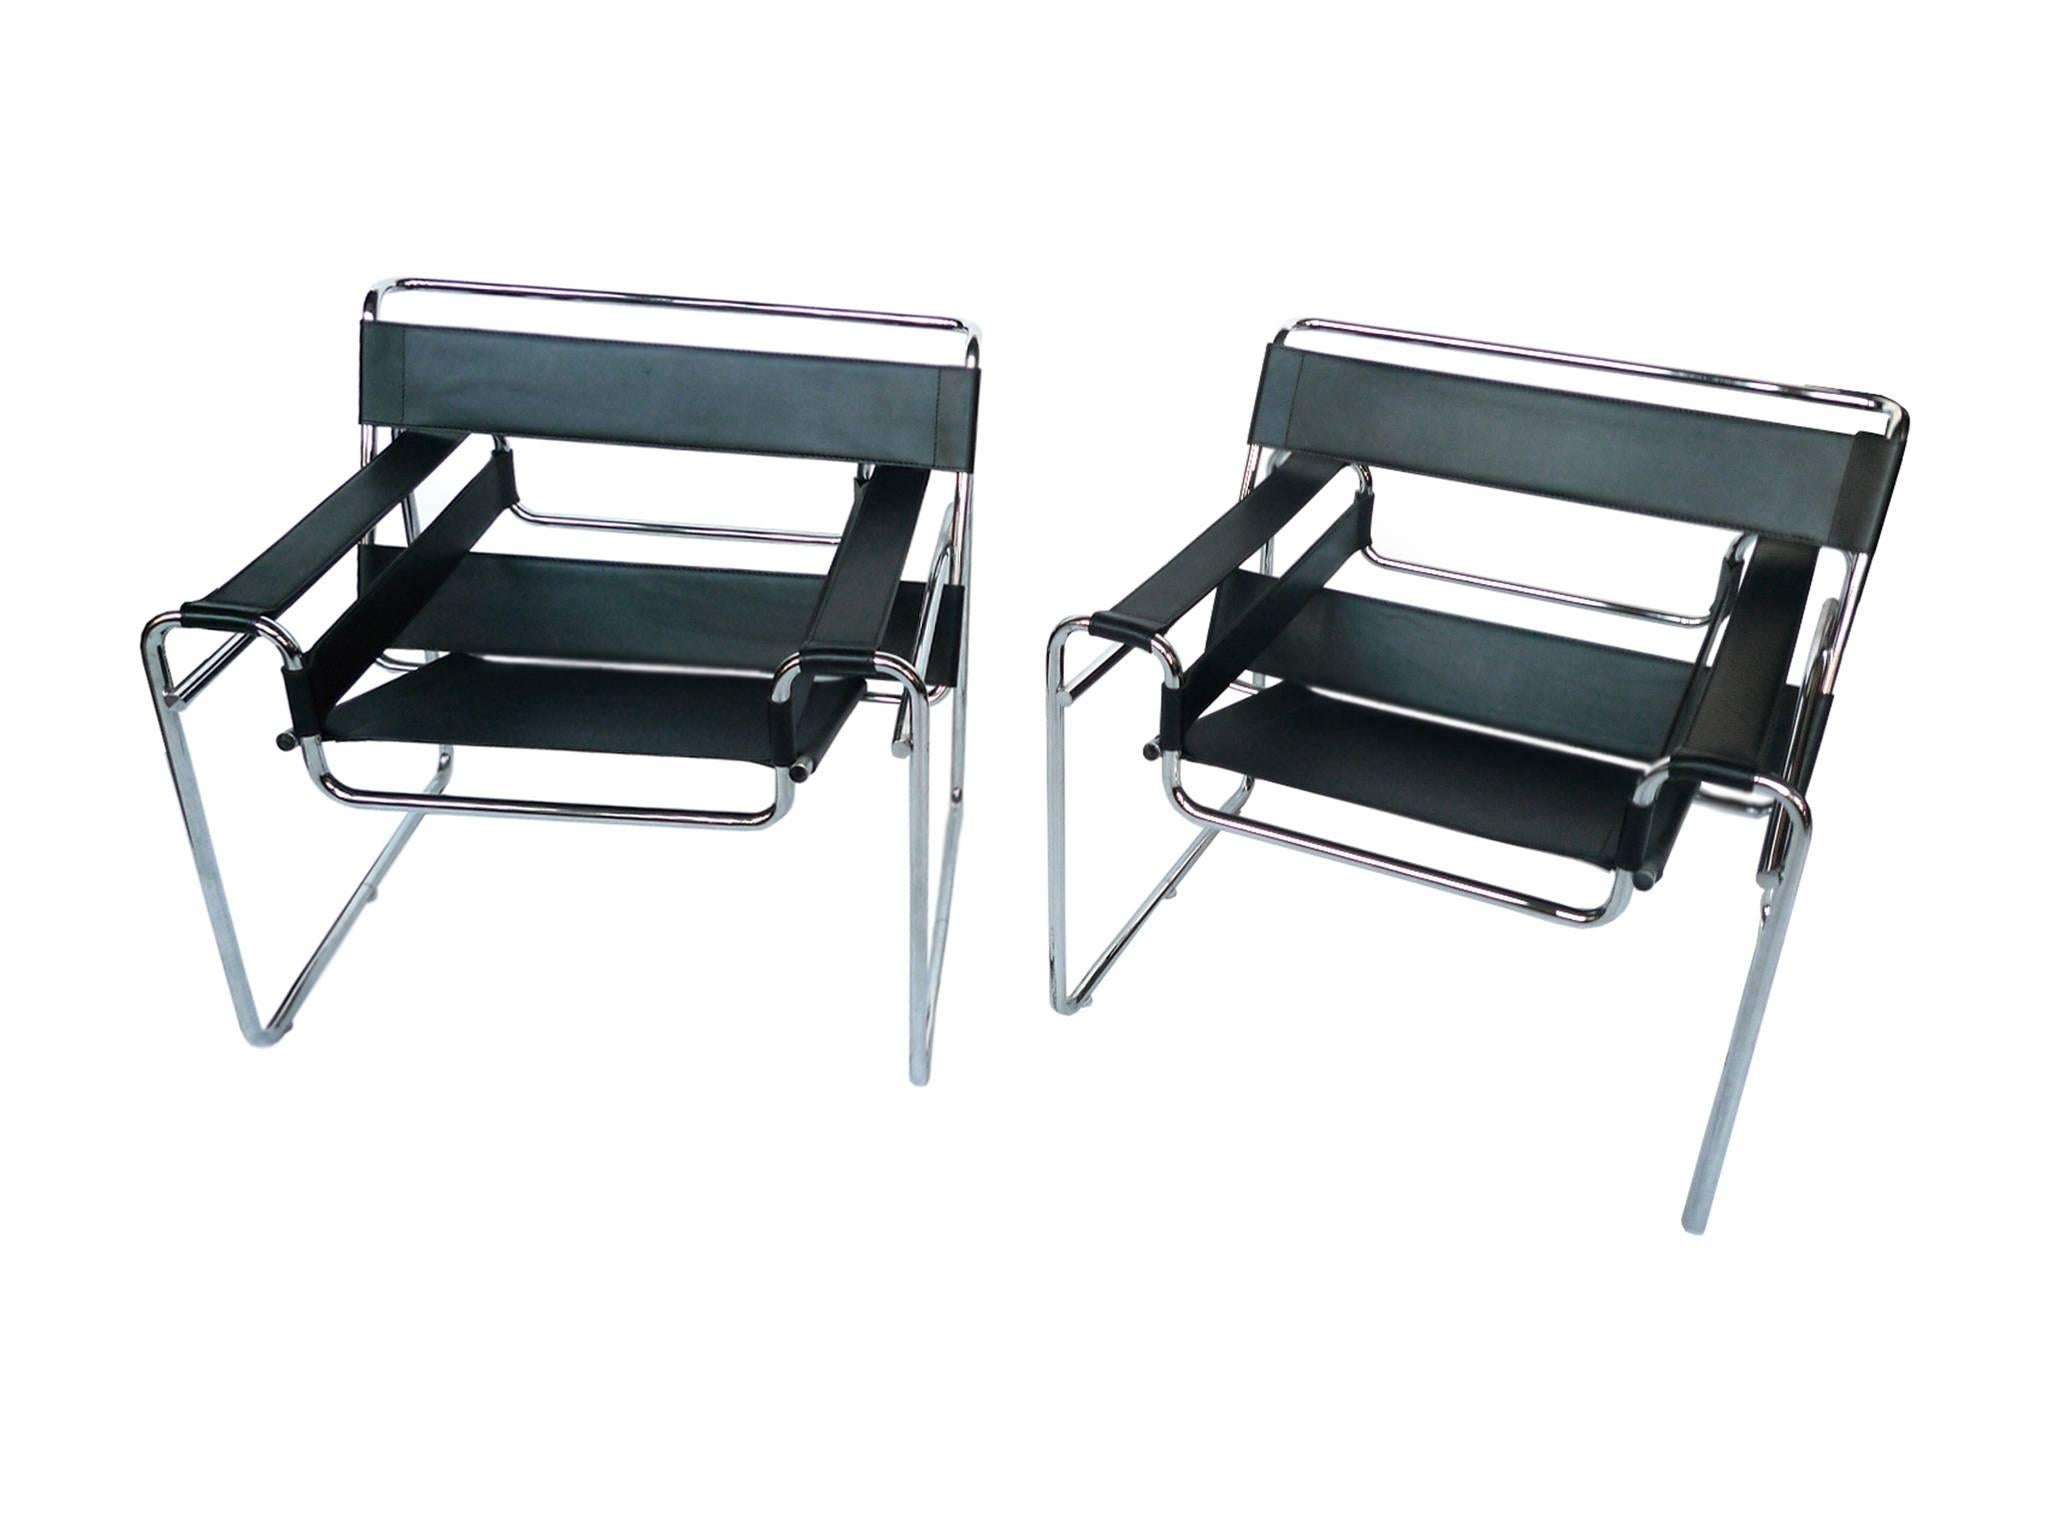 Designed circa 1925 by Marcel Breuer, these Wassily chairs have tubular steel frames and black leather seating, backing, and armrests. It's a beautiful, modernist design offering transparency with its minimalist lines and planes. The seat slopes